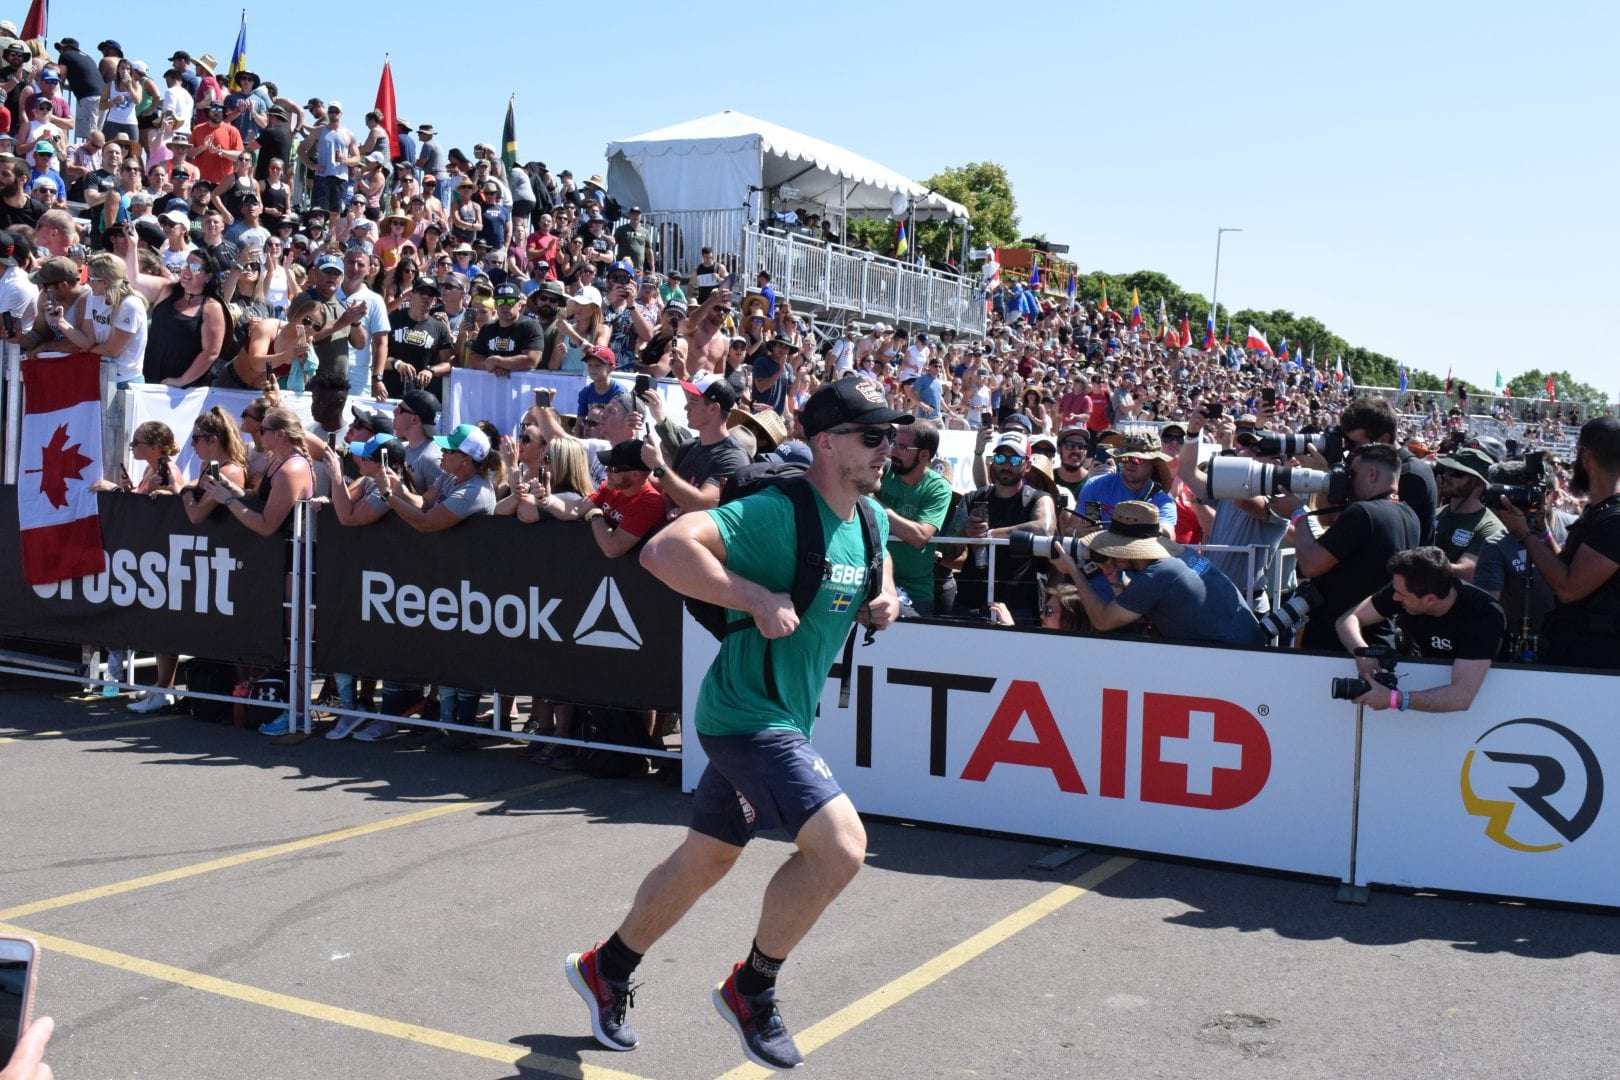 Lukas Högberg of Sweden completes the Ruck Run event at the 2019 CrossFit Games